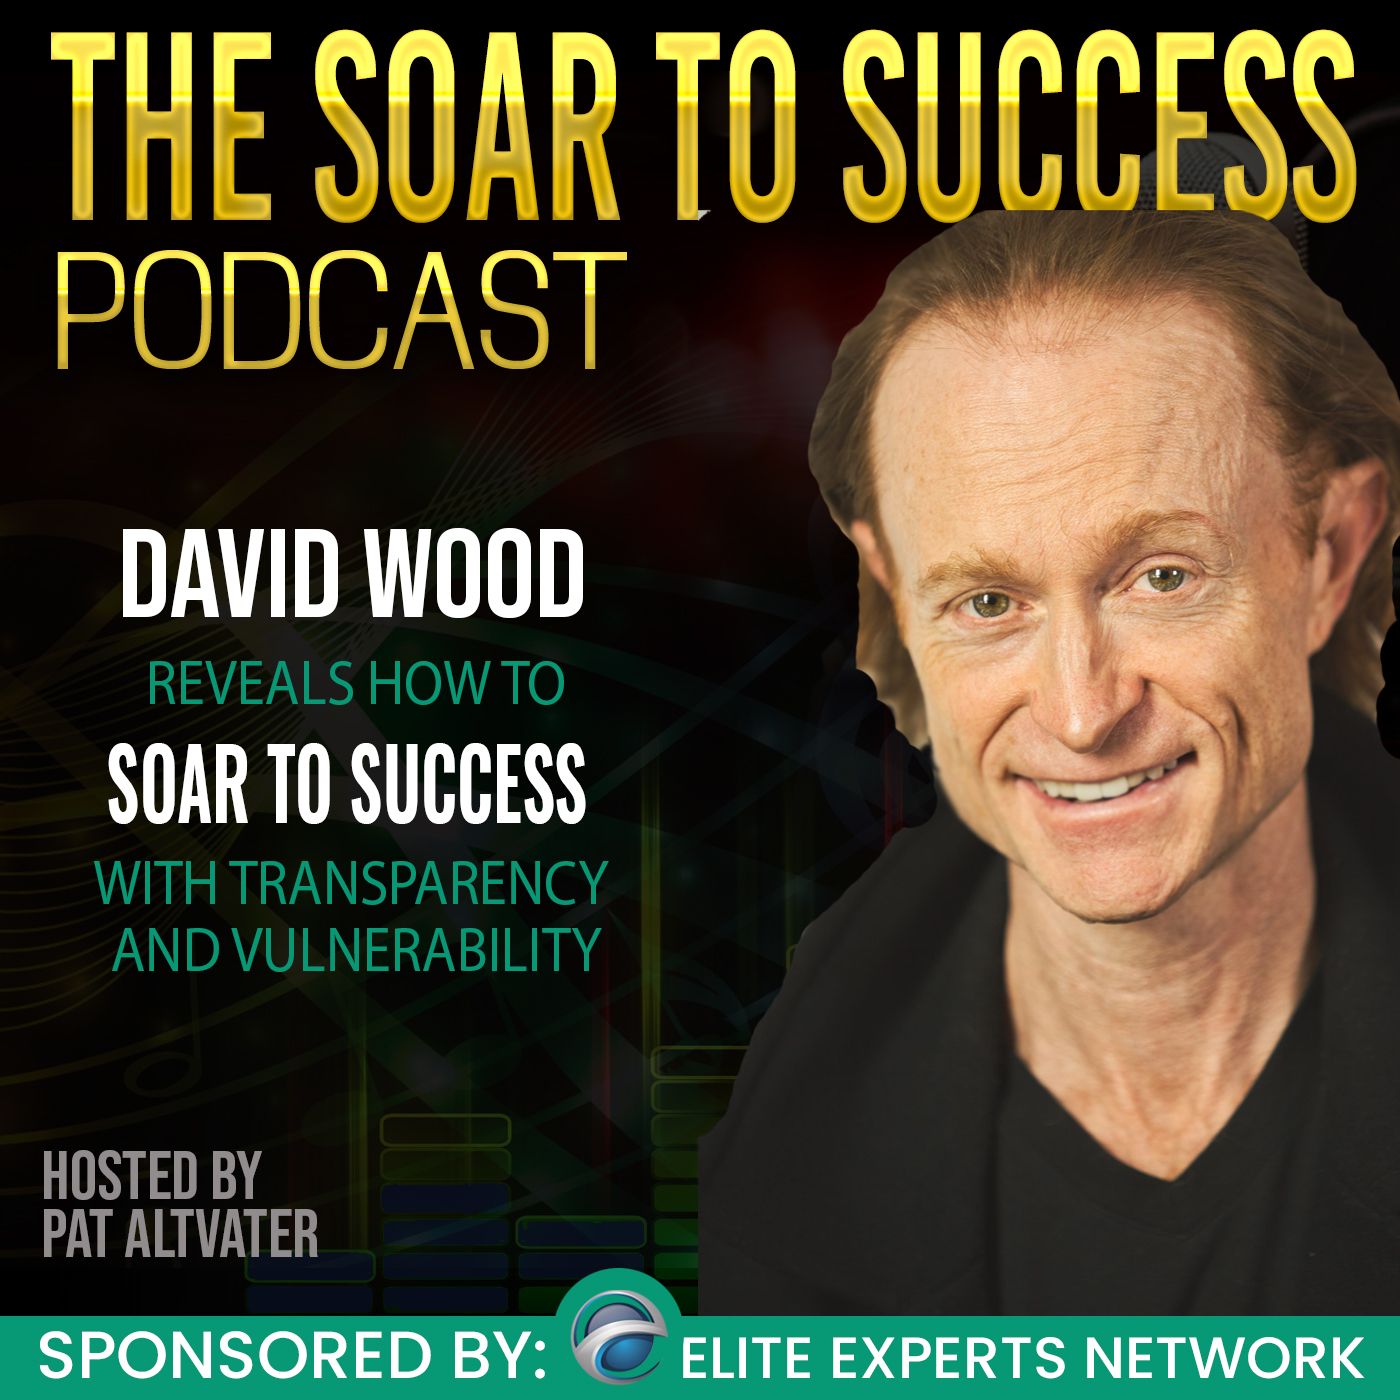 David Wood’s New Book Mouse in the Room Will Help Individuals Soar to Success